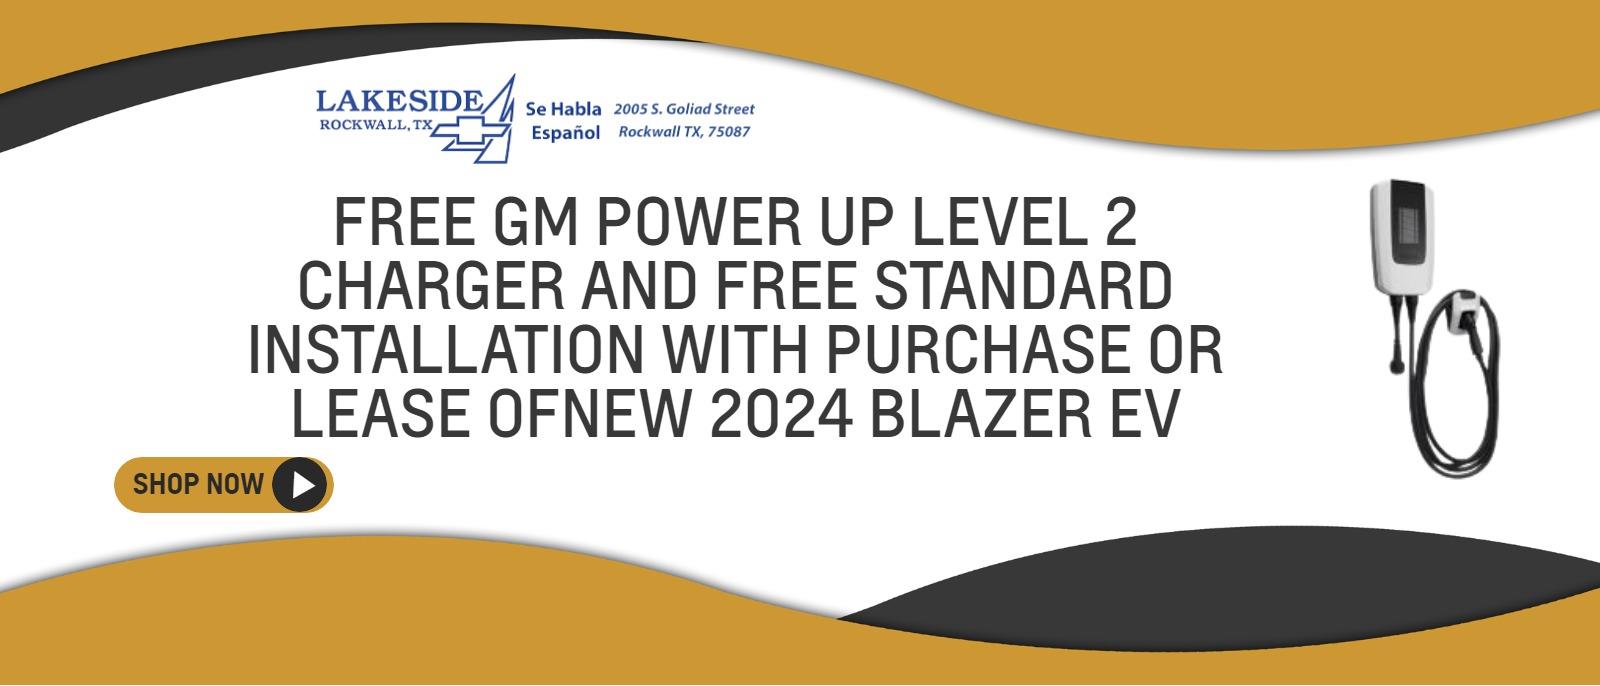 “Free GM Power Up Level 2 Charger and free Standard Installation with purchase or lease of New 2024 Blazer EV.